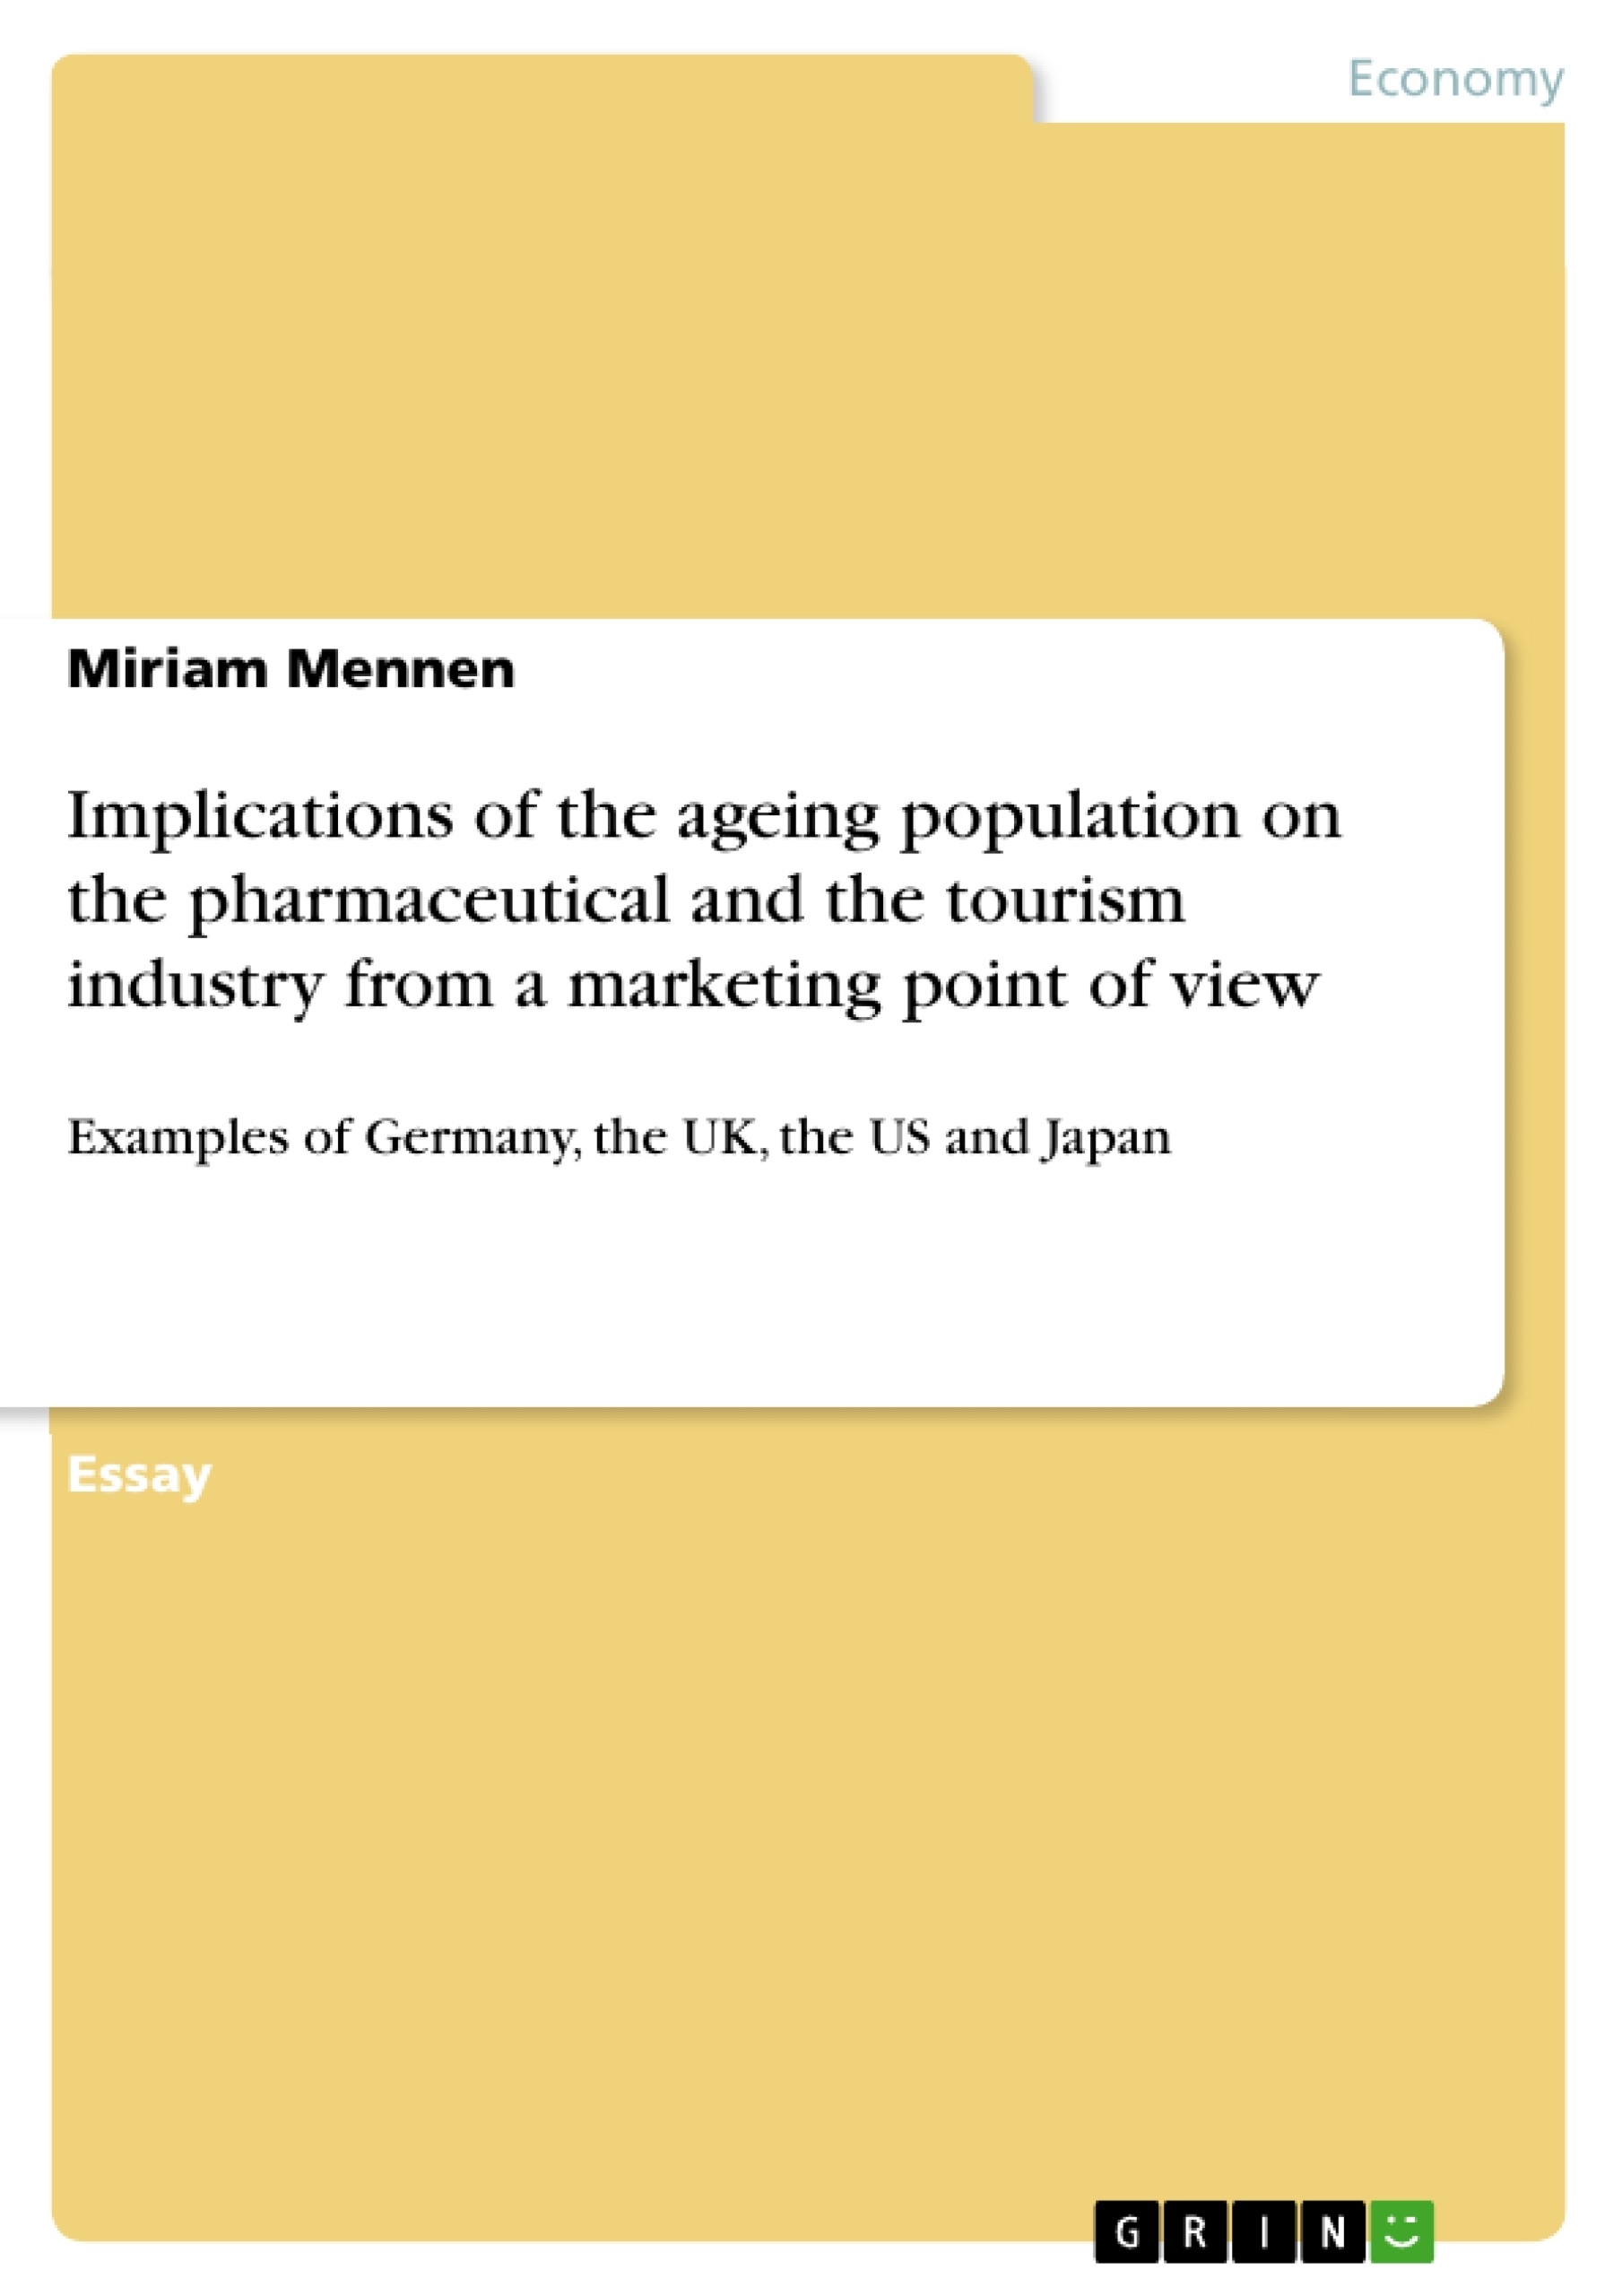 Title: Implications of the ageing population on the pharmaceutical and the tourism industry from a marketing point of view 